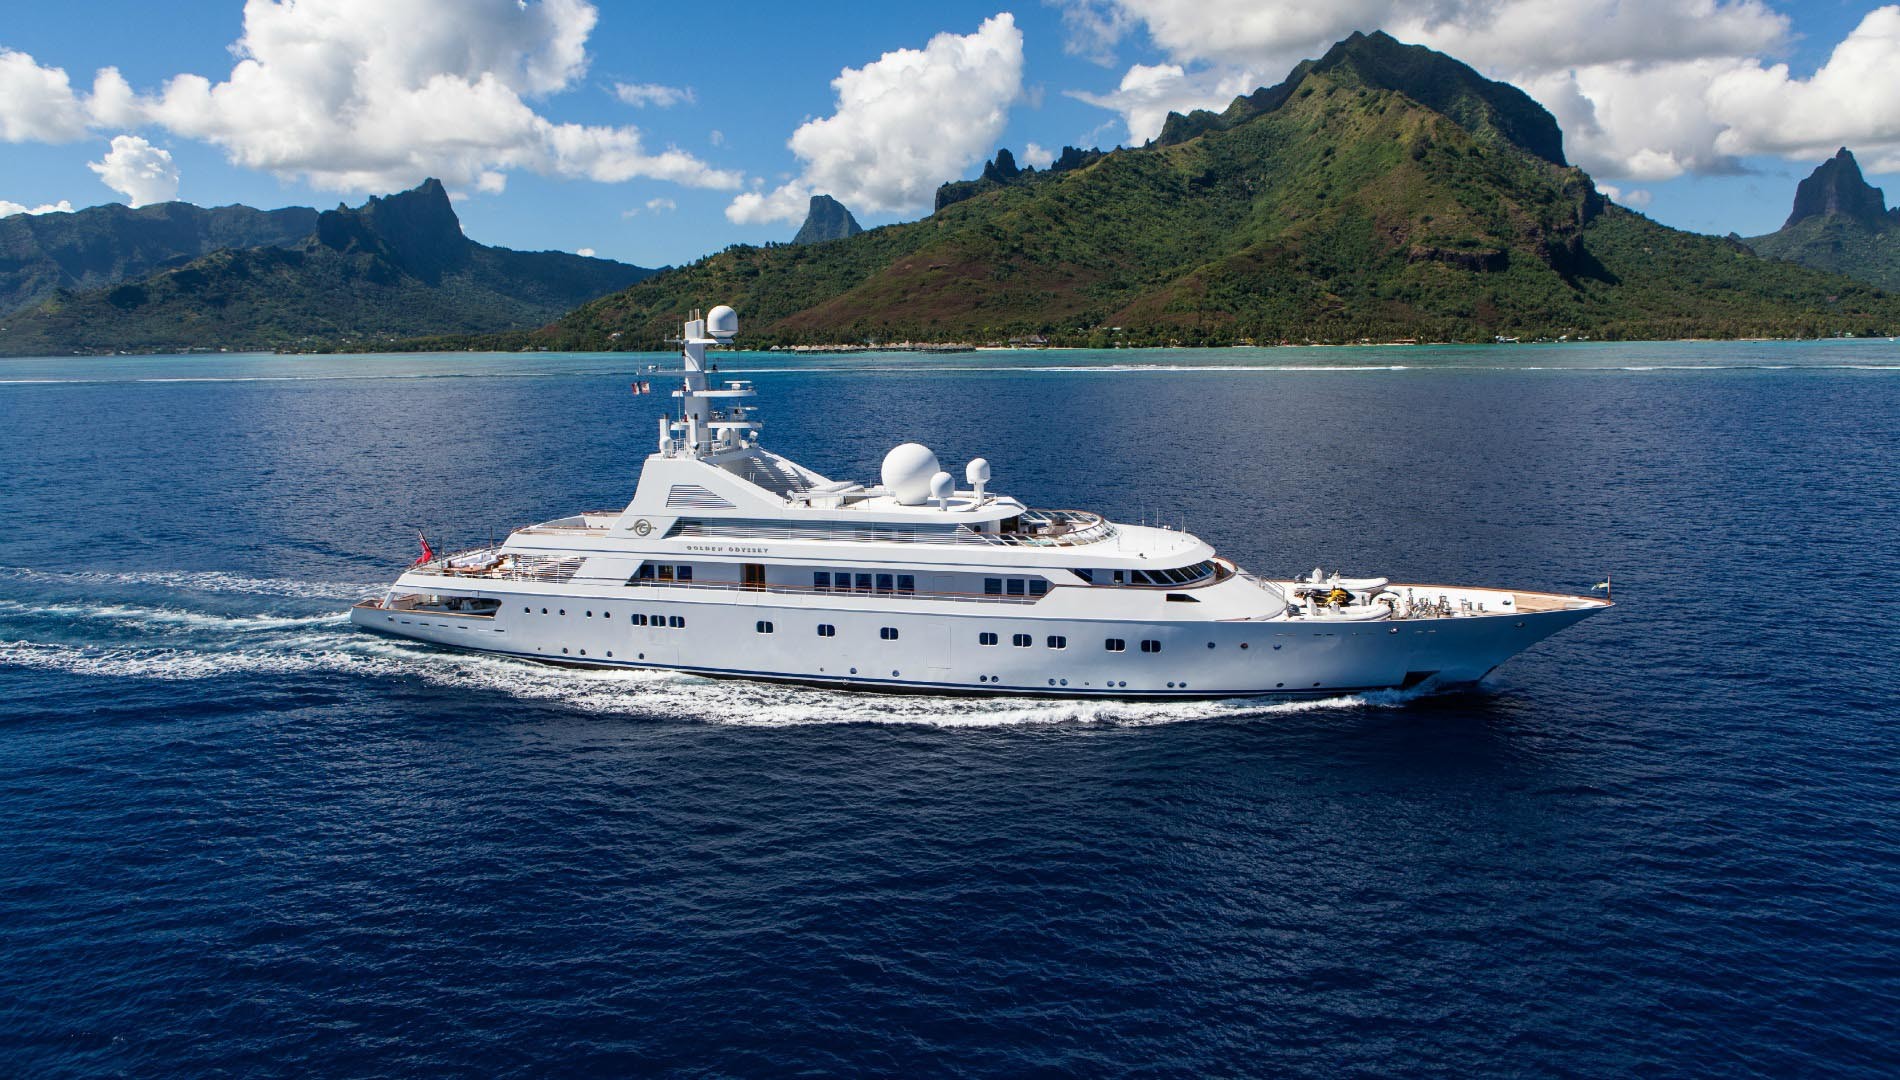 Grand Ocean Yacht in South Pacific - Profile Photo